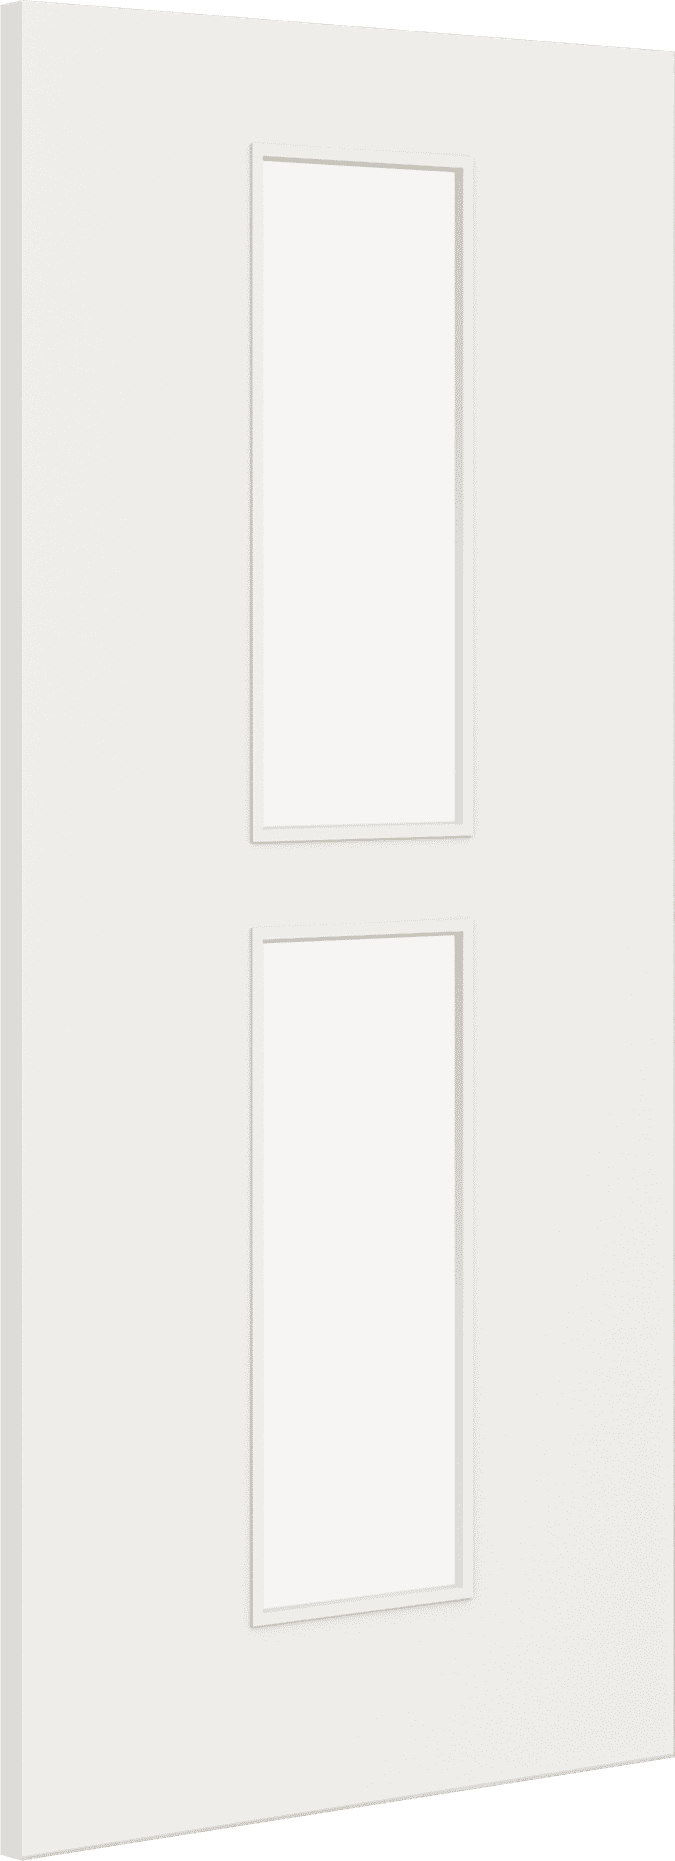 1981mm x 914mm x 44mm (36") Architectural Paint Grade White 12 Clear Glazed Fire Door Blank